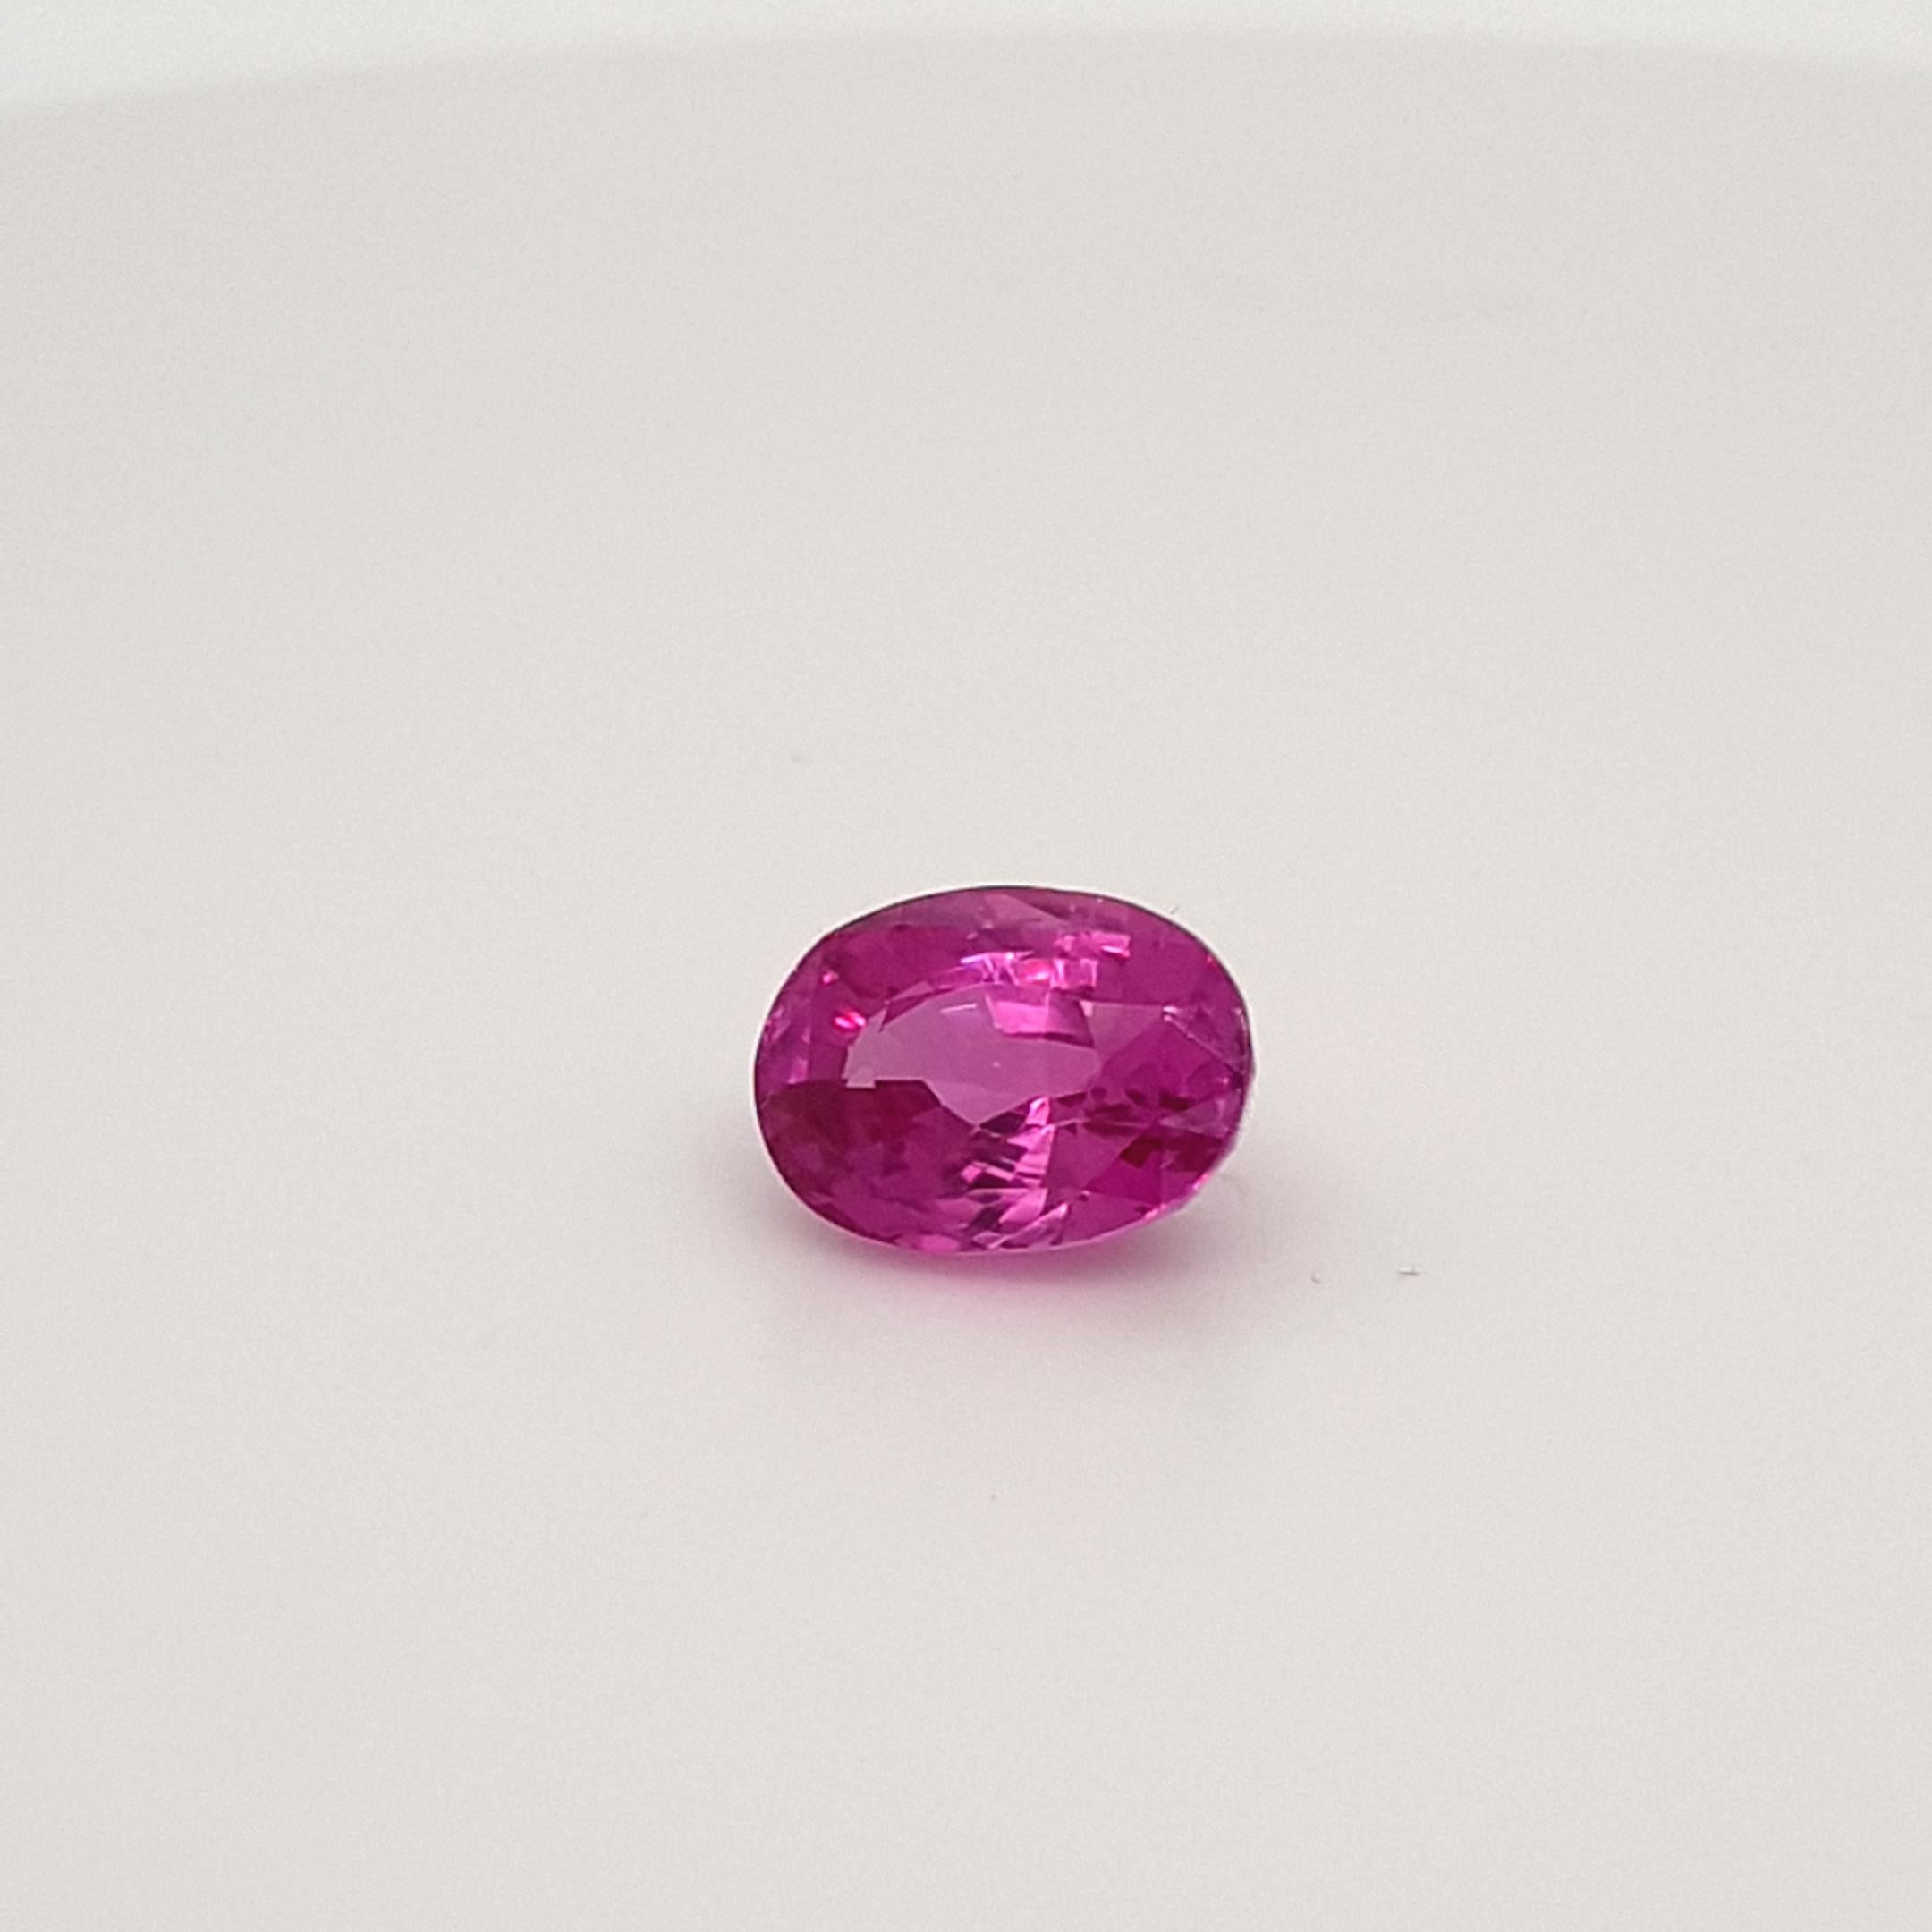 We are delighted to be able to offer for sale, this 4,46 ct. Purple-Pink Sapphire from our exclusive collection.
This beautiful gem has a intense purple-pink color and a great fire. Cutting, proportion and cleaness enable an very high light return